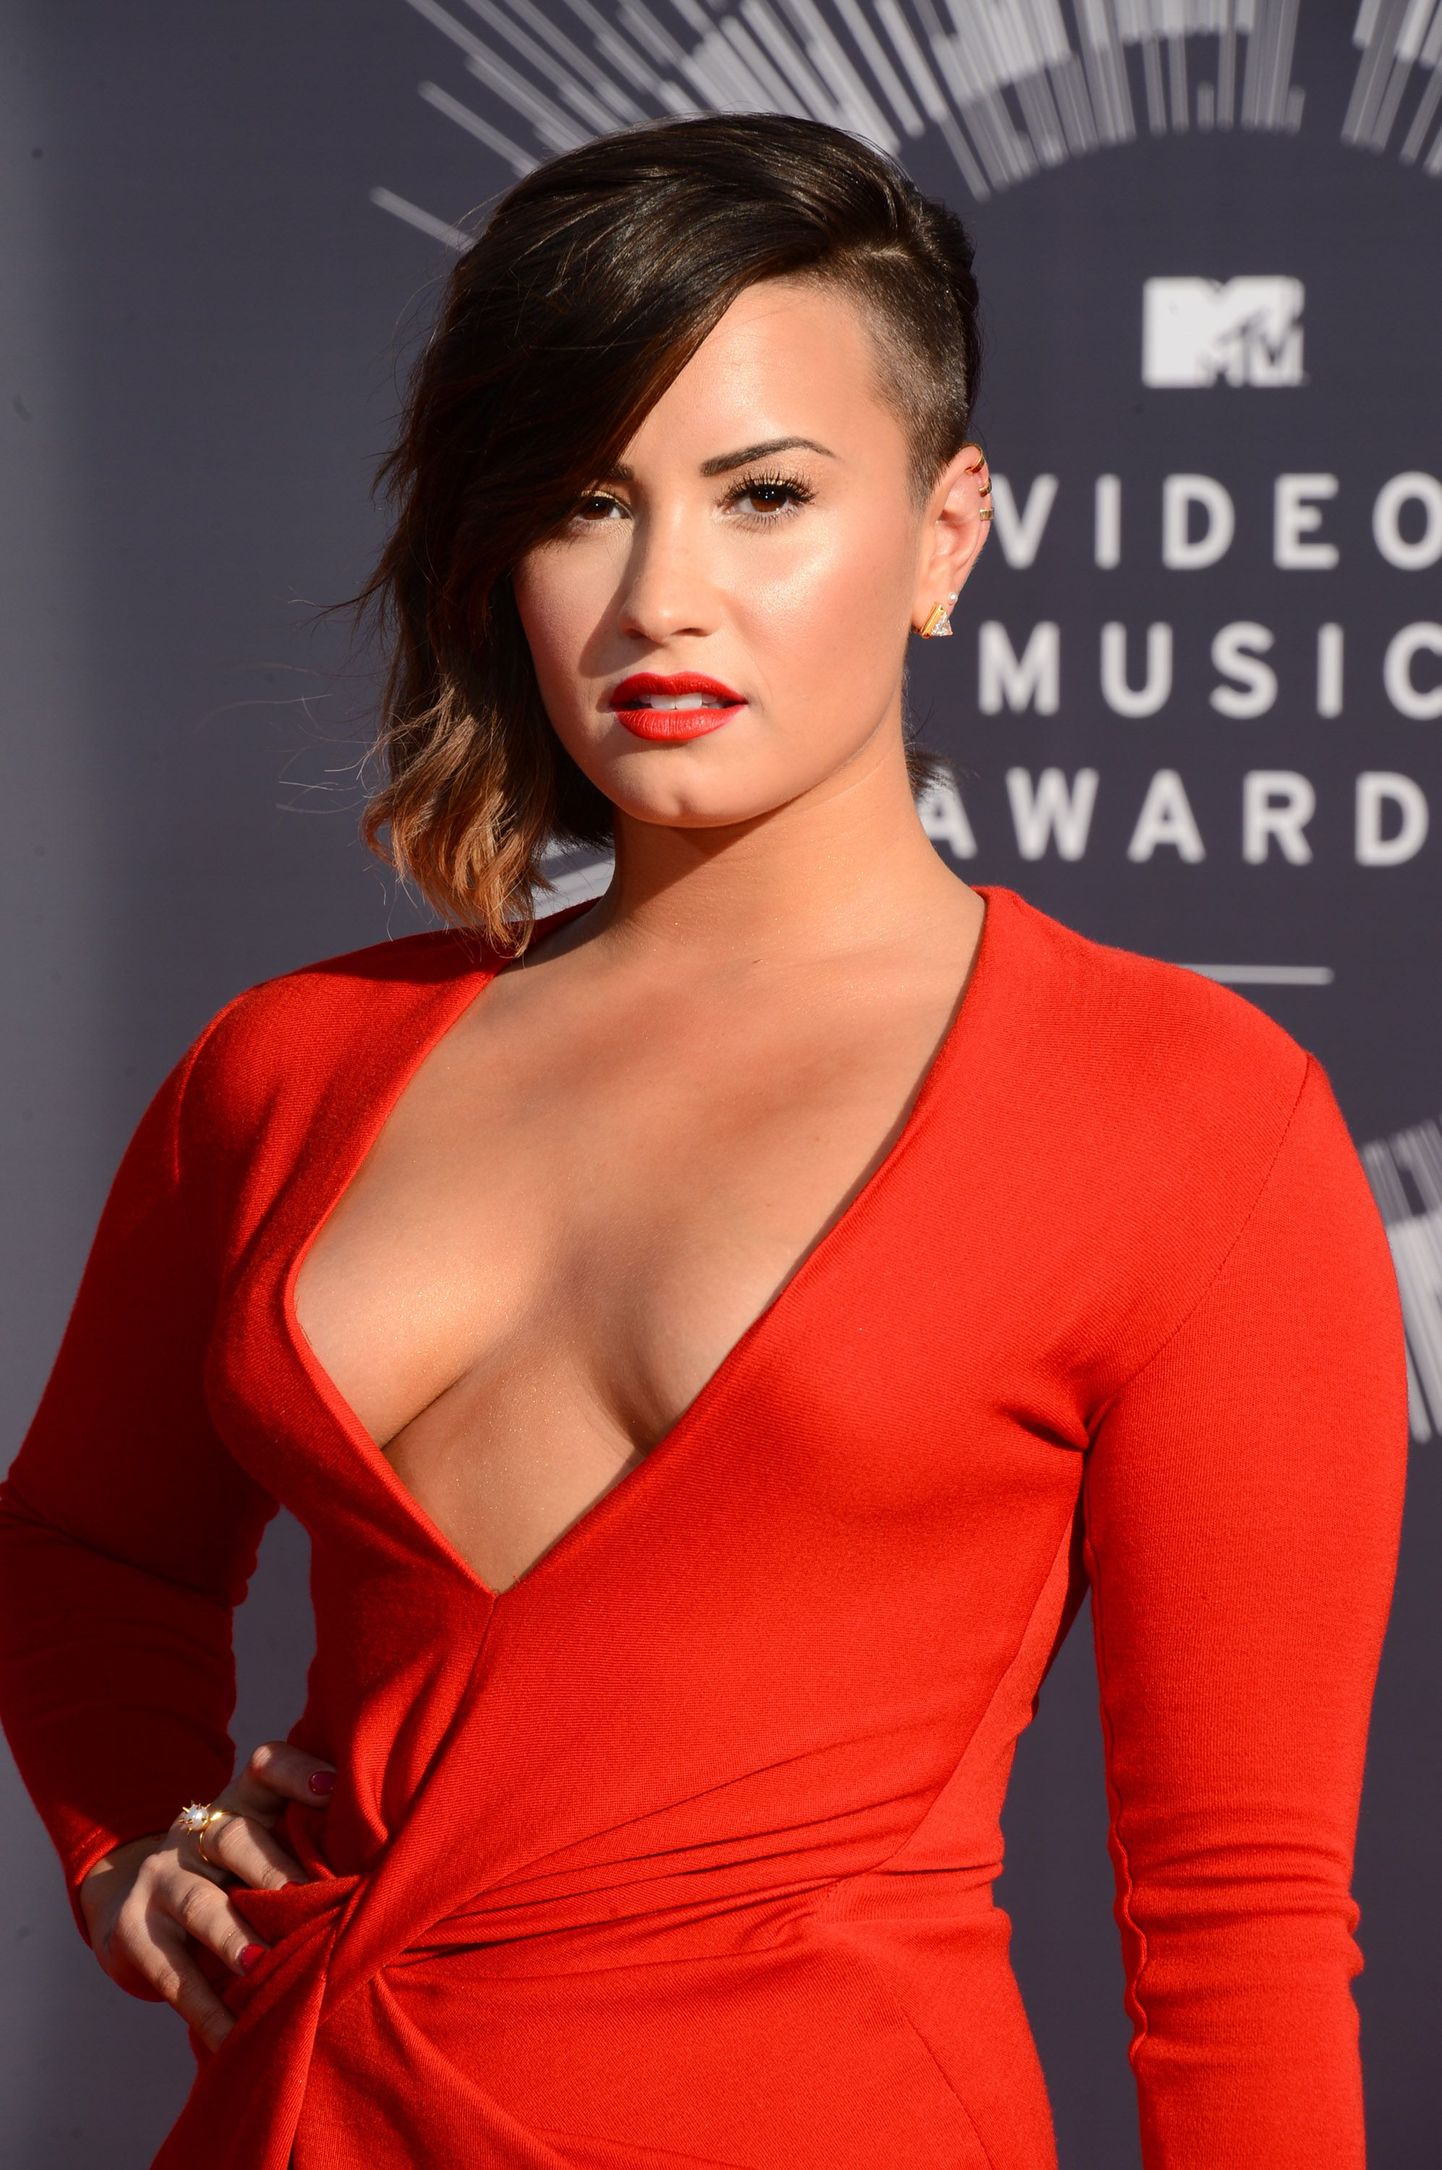 Demi Lovato arrives at the MTV Video Music Awards at The Forum on Sunday, Aug. 24, 2014, in Inglewood, Calif. (Photo by Jordan Strauss/Invision/AP) / TT / kod 436